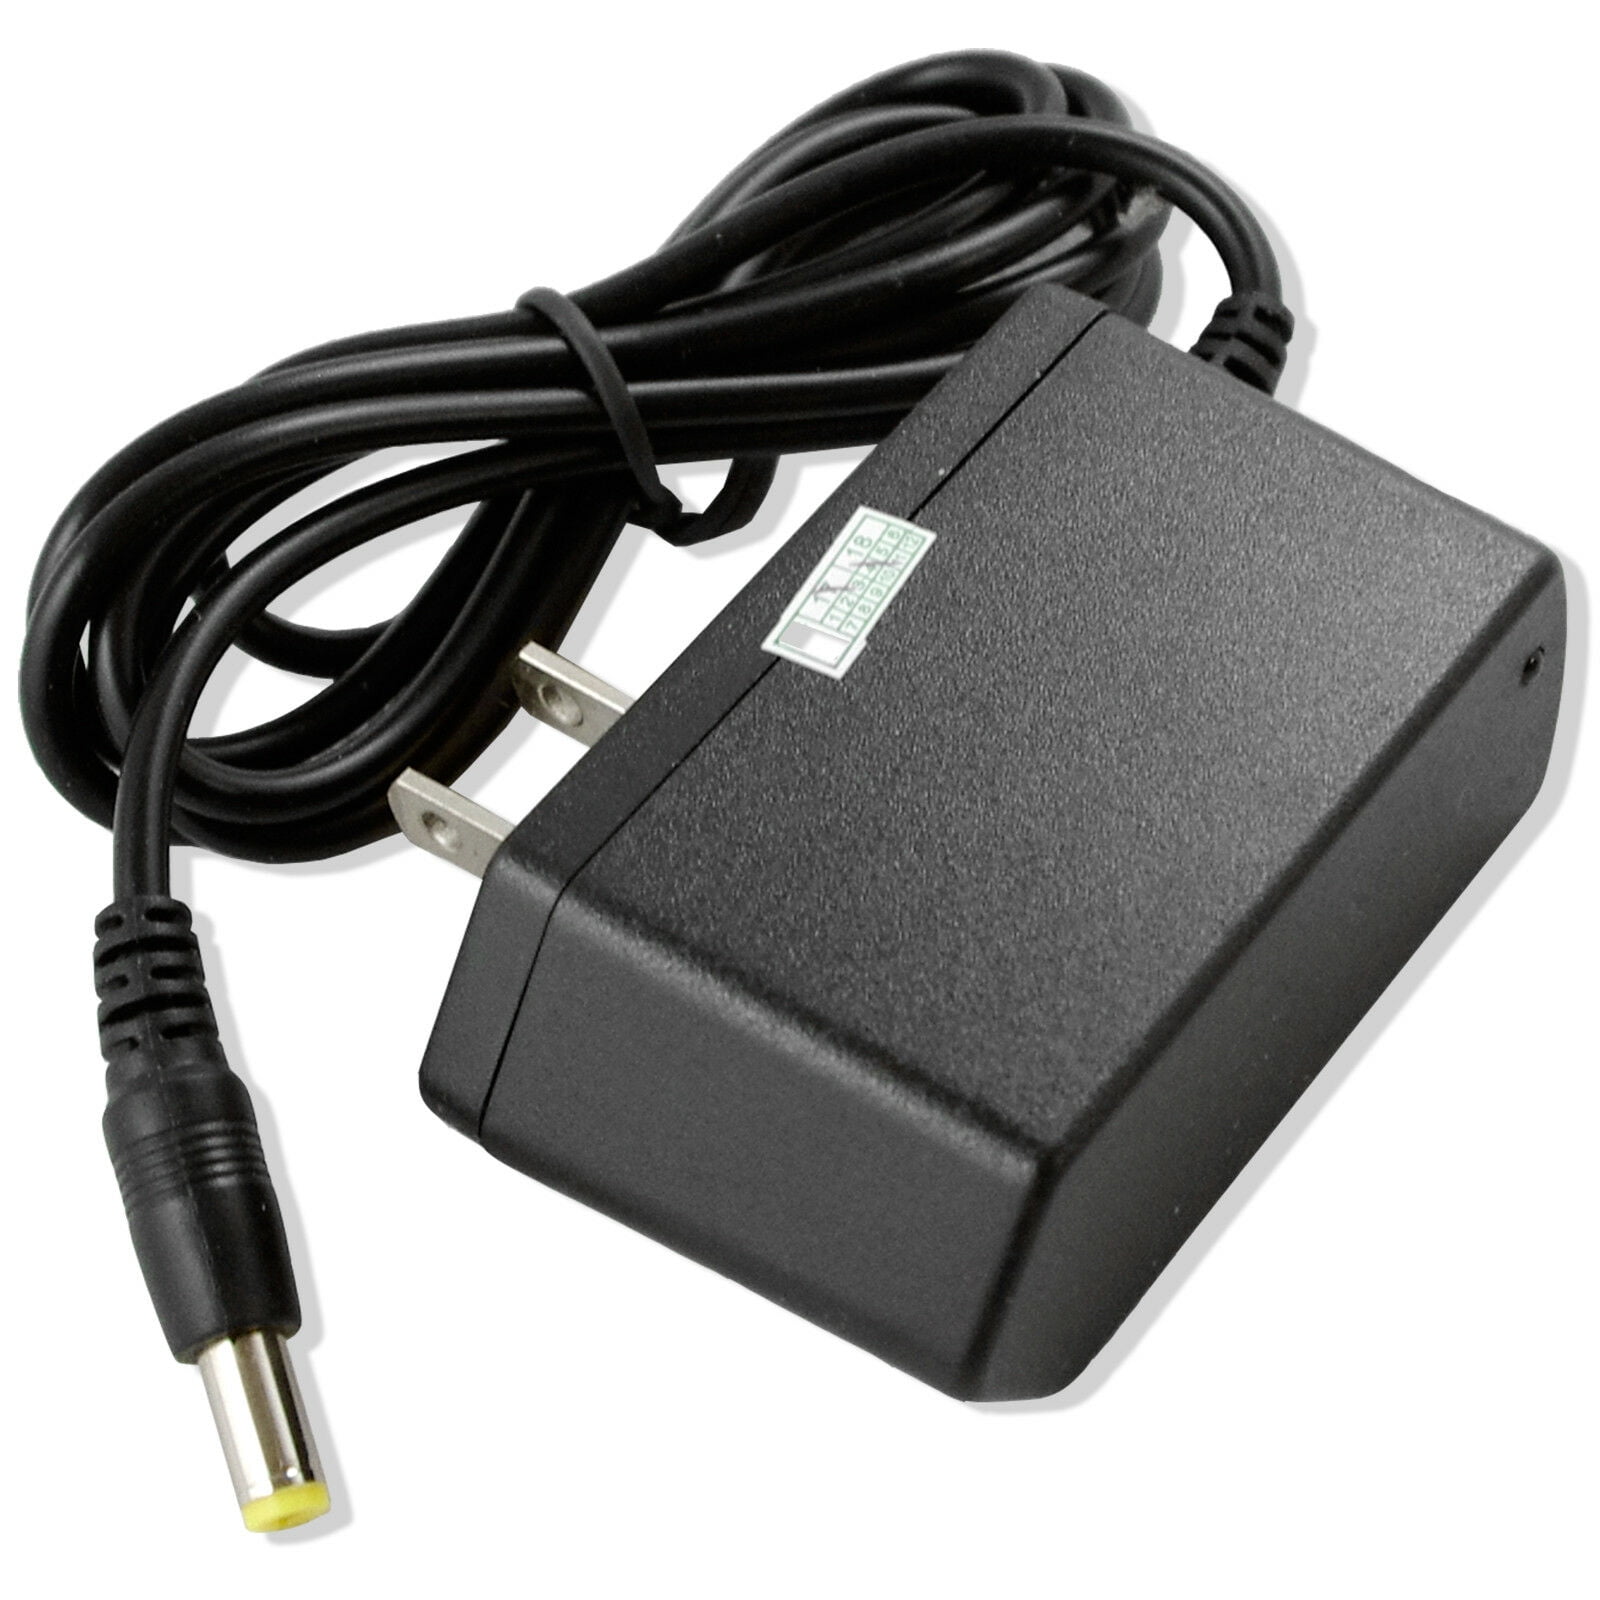 MaxLLTo Replacement AC Adapter For Casio CTK 519 CTK 520L CTK-519 CTK-520L Keyboard Power Supply Cord Charger PSU 